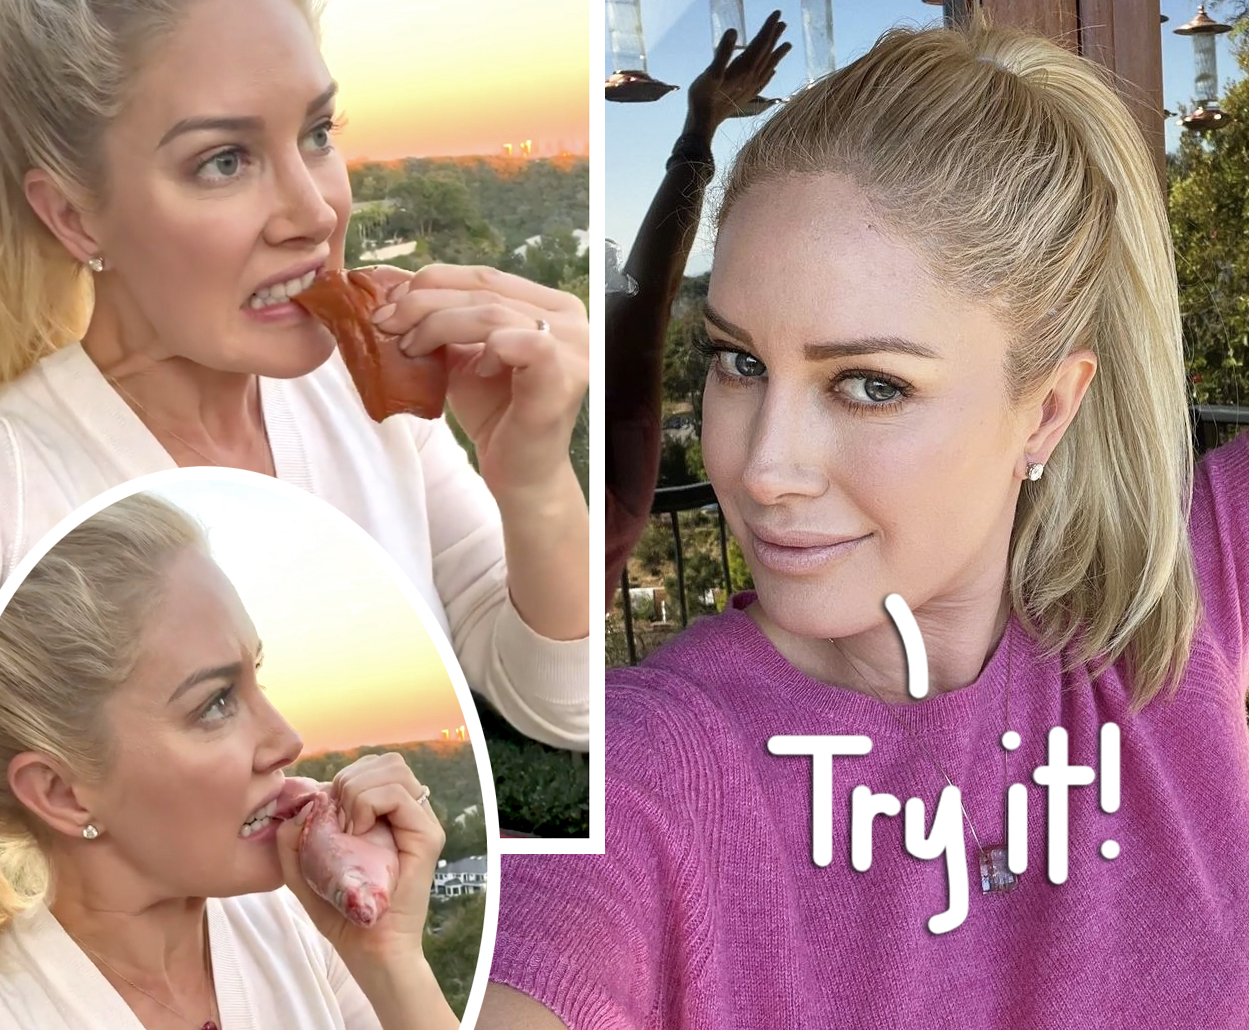 #Heidi Montag Eats WHAT To Help Fertility Issues?!